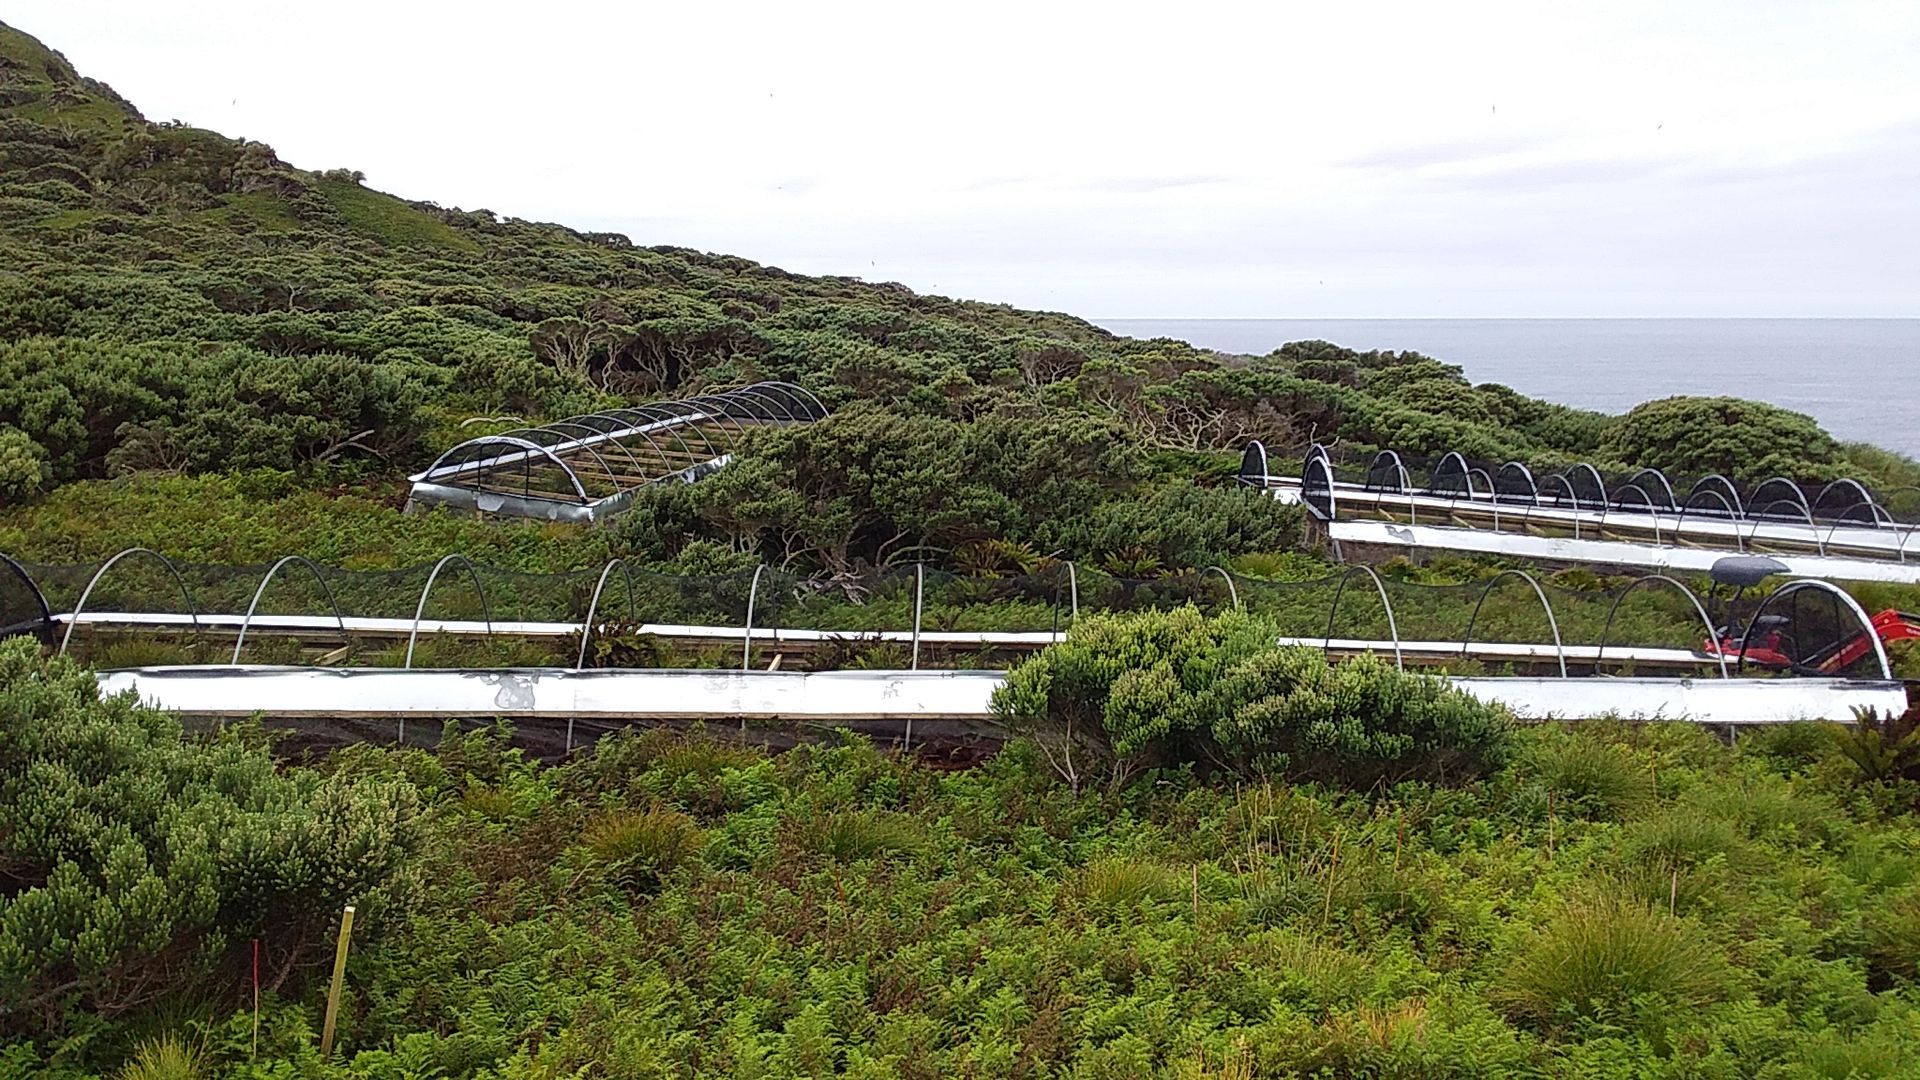 3 poly tunnel aviaries for moorhen chicks on Gough Island